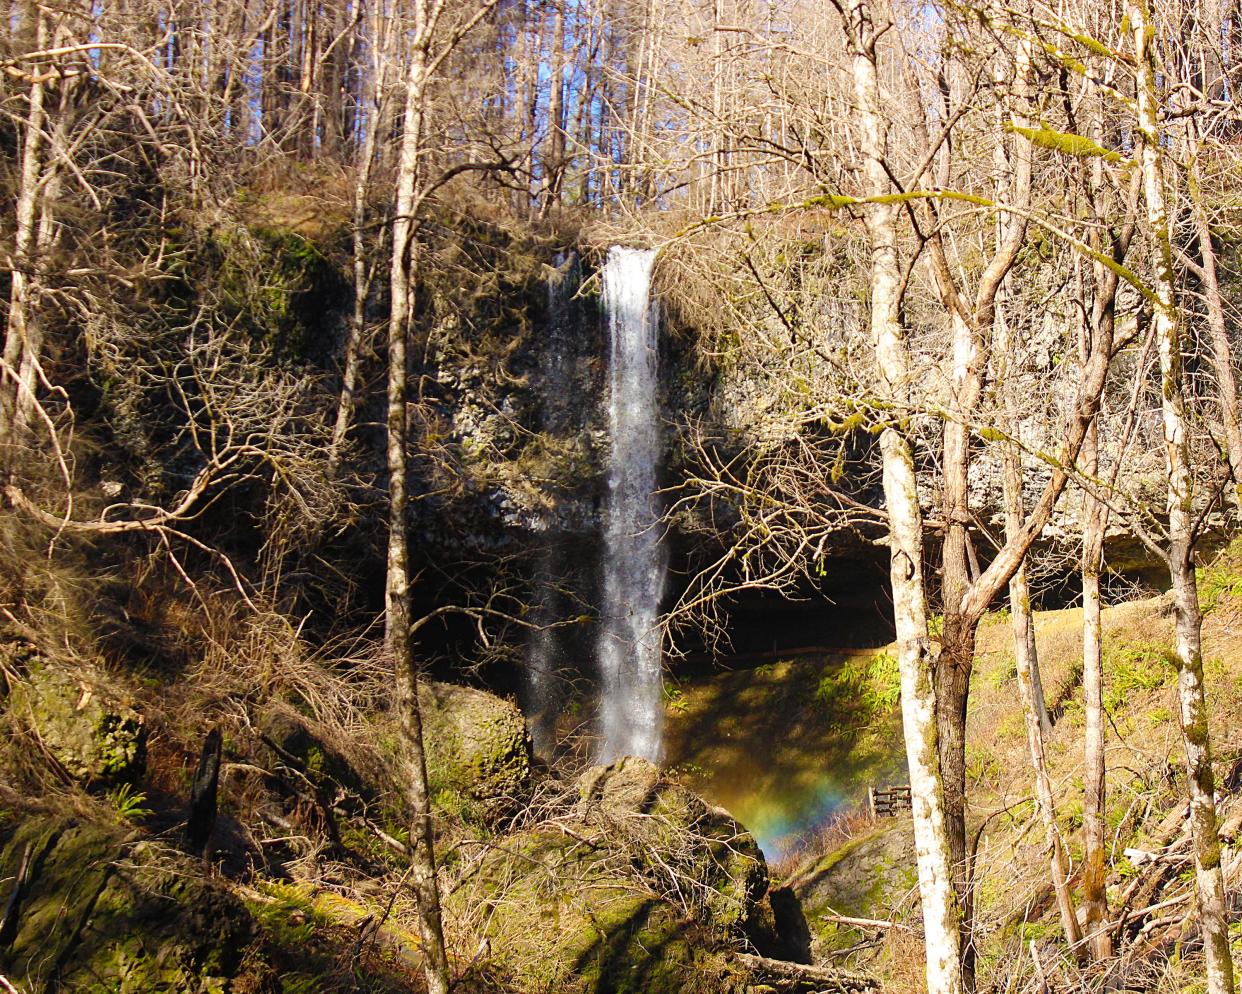 Shellburg Falls was burned in the 2020 Beachie Creek Fire. It is set to reopen on May 17.